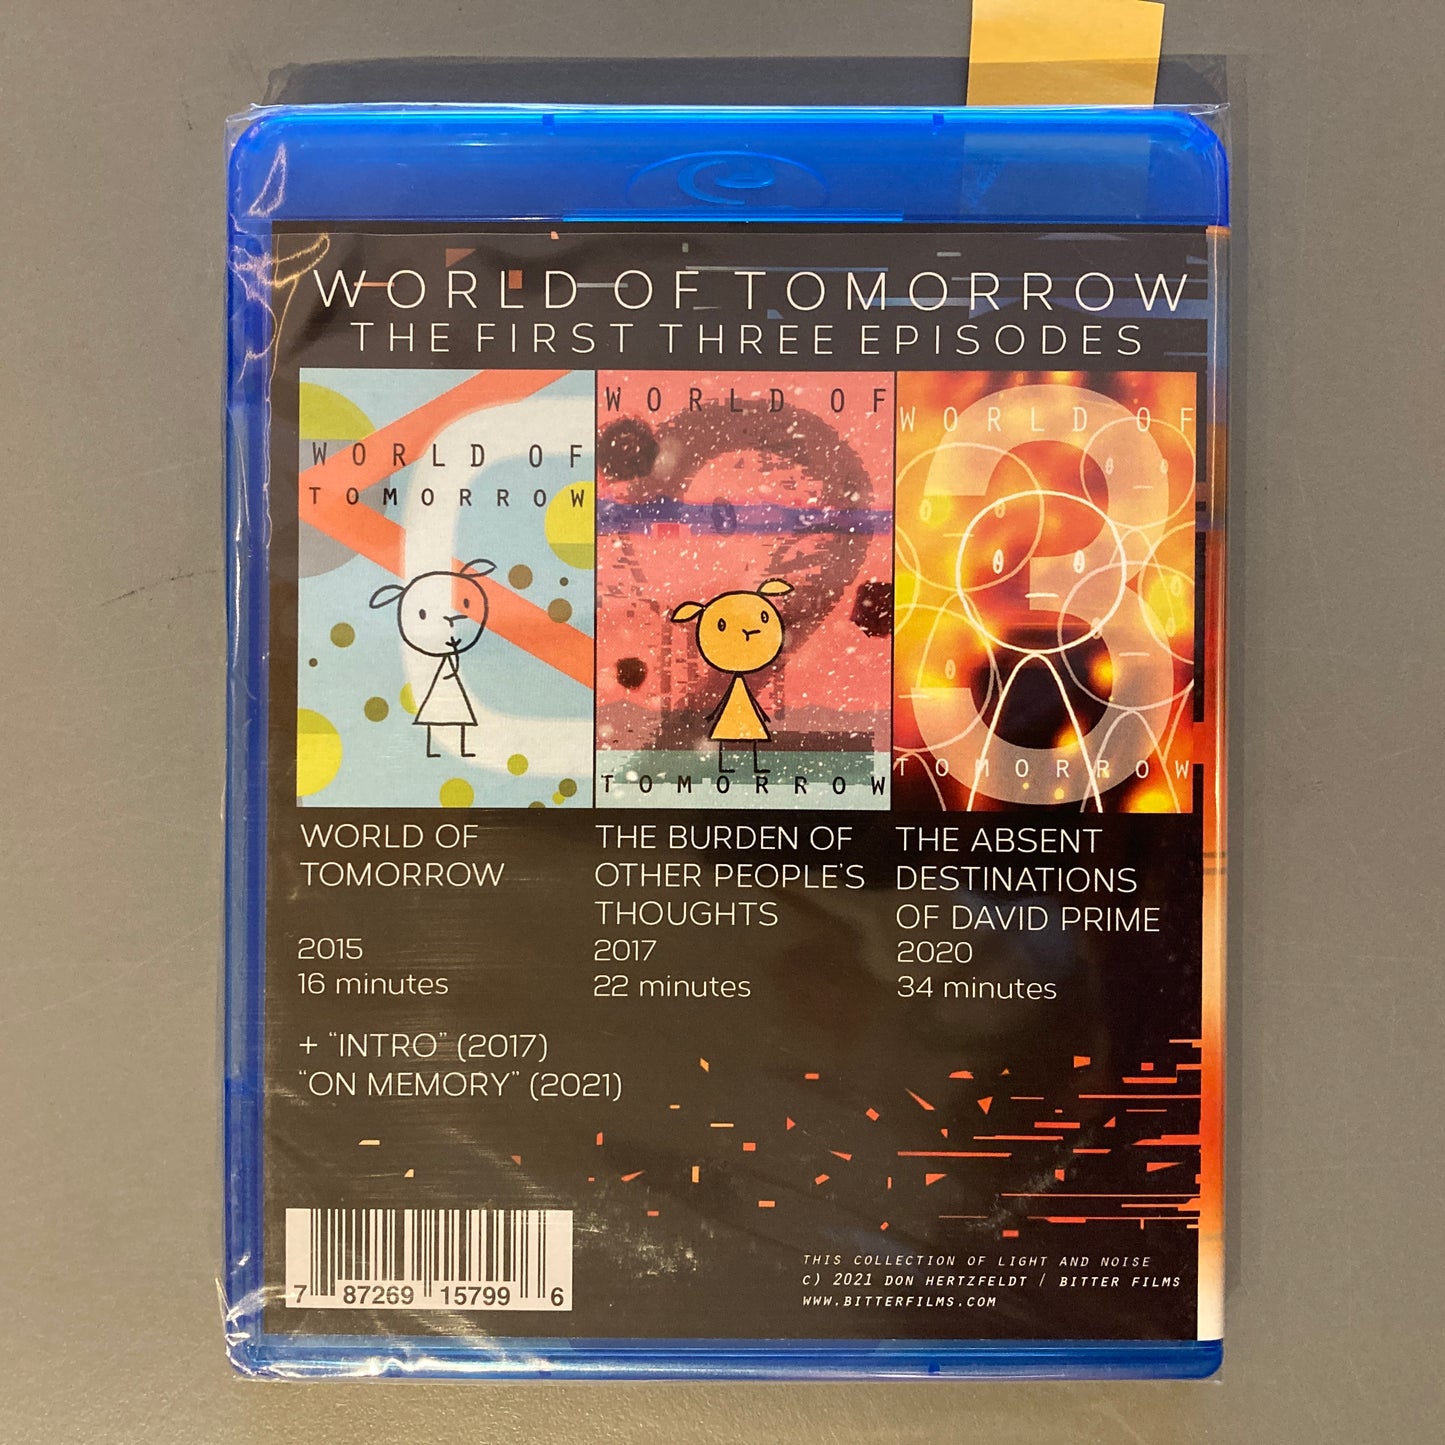 World of Tomorrow: The First Three Episodes (Blu-ray)